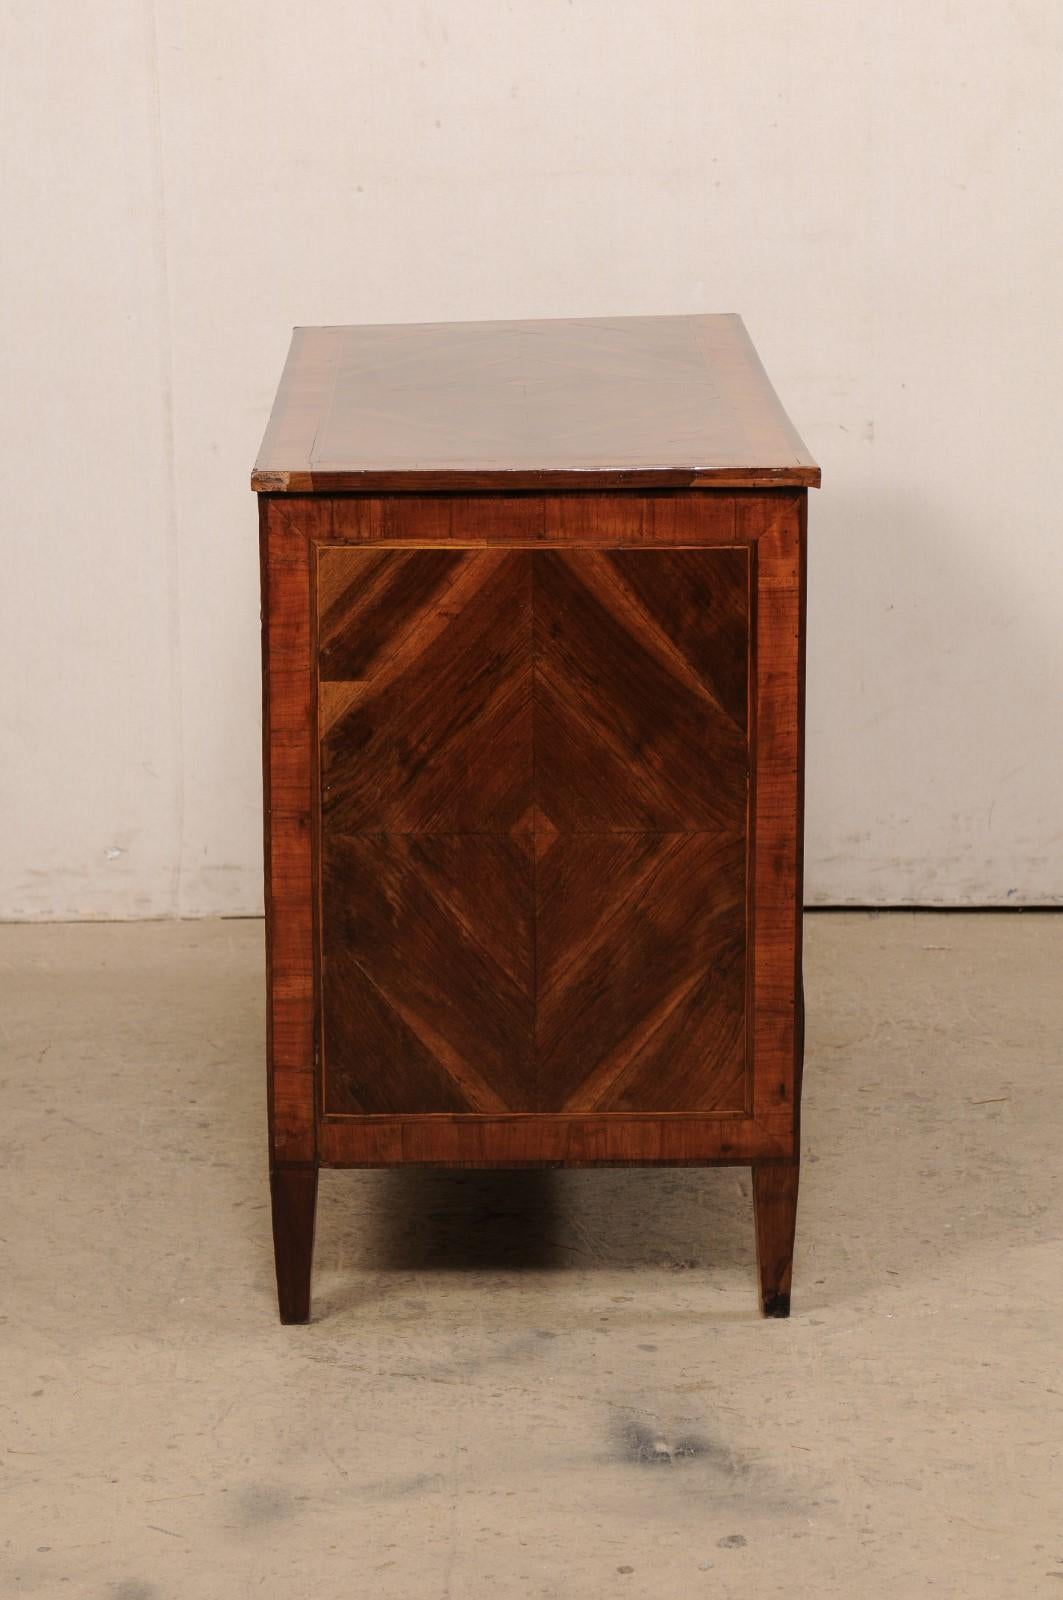 French Empire Commode with Beautiful Inlay & Bookmatched Veneer, Early 19th C. For Sale 1